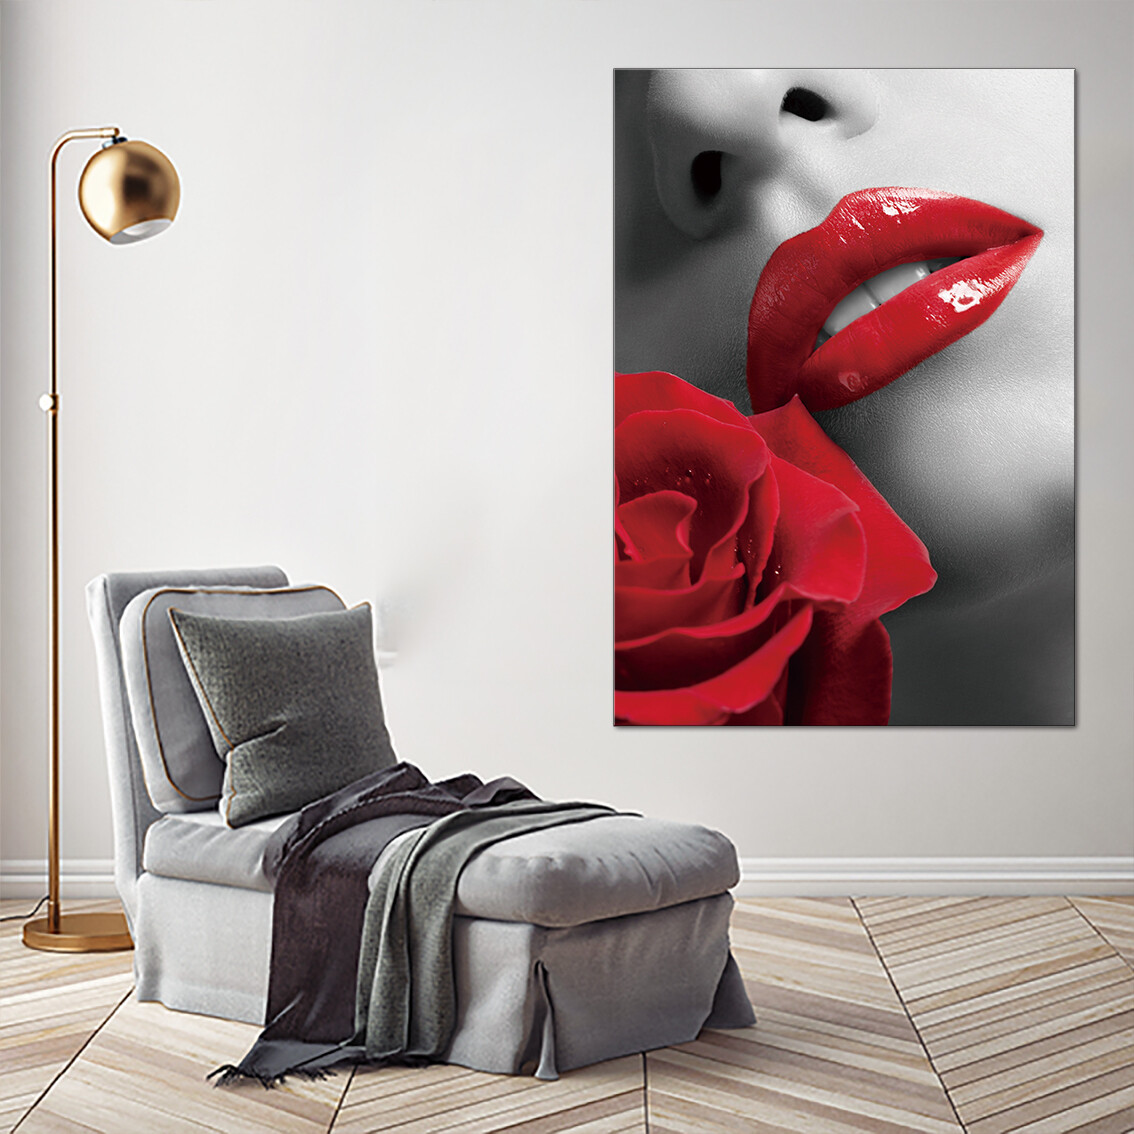 Rose Lip - Modern Luxury Wall art Printed on Acrylic Glass - Frameless and Ready to Hang